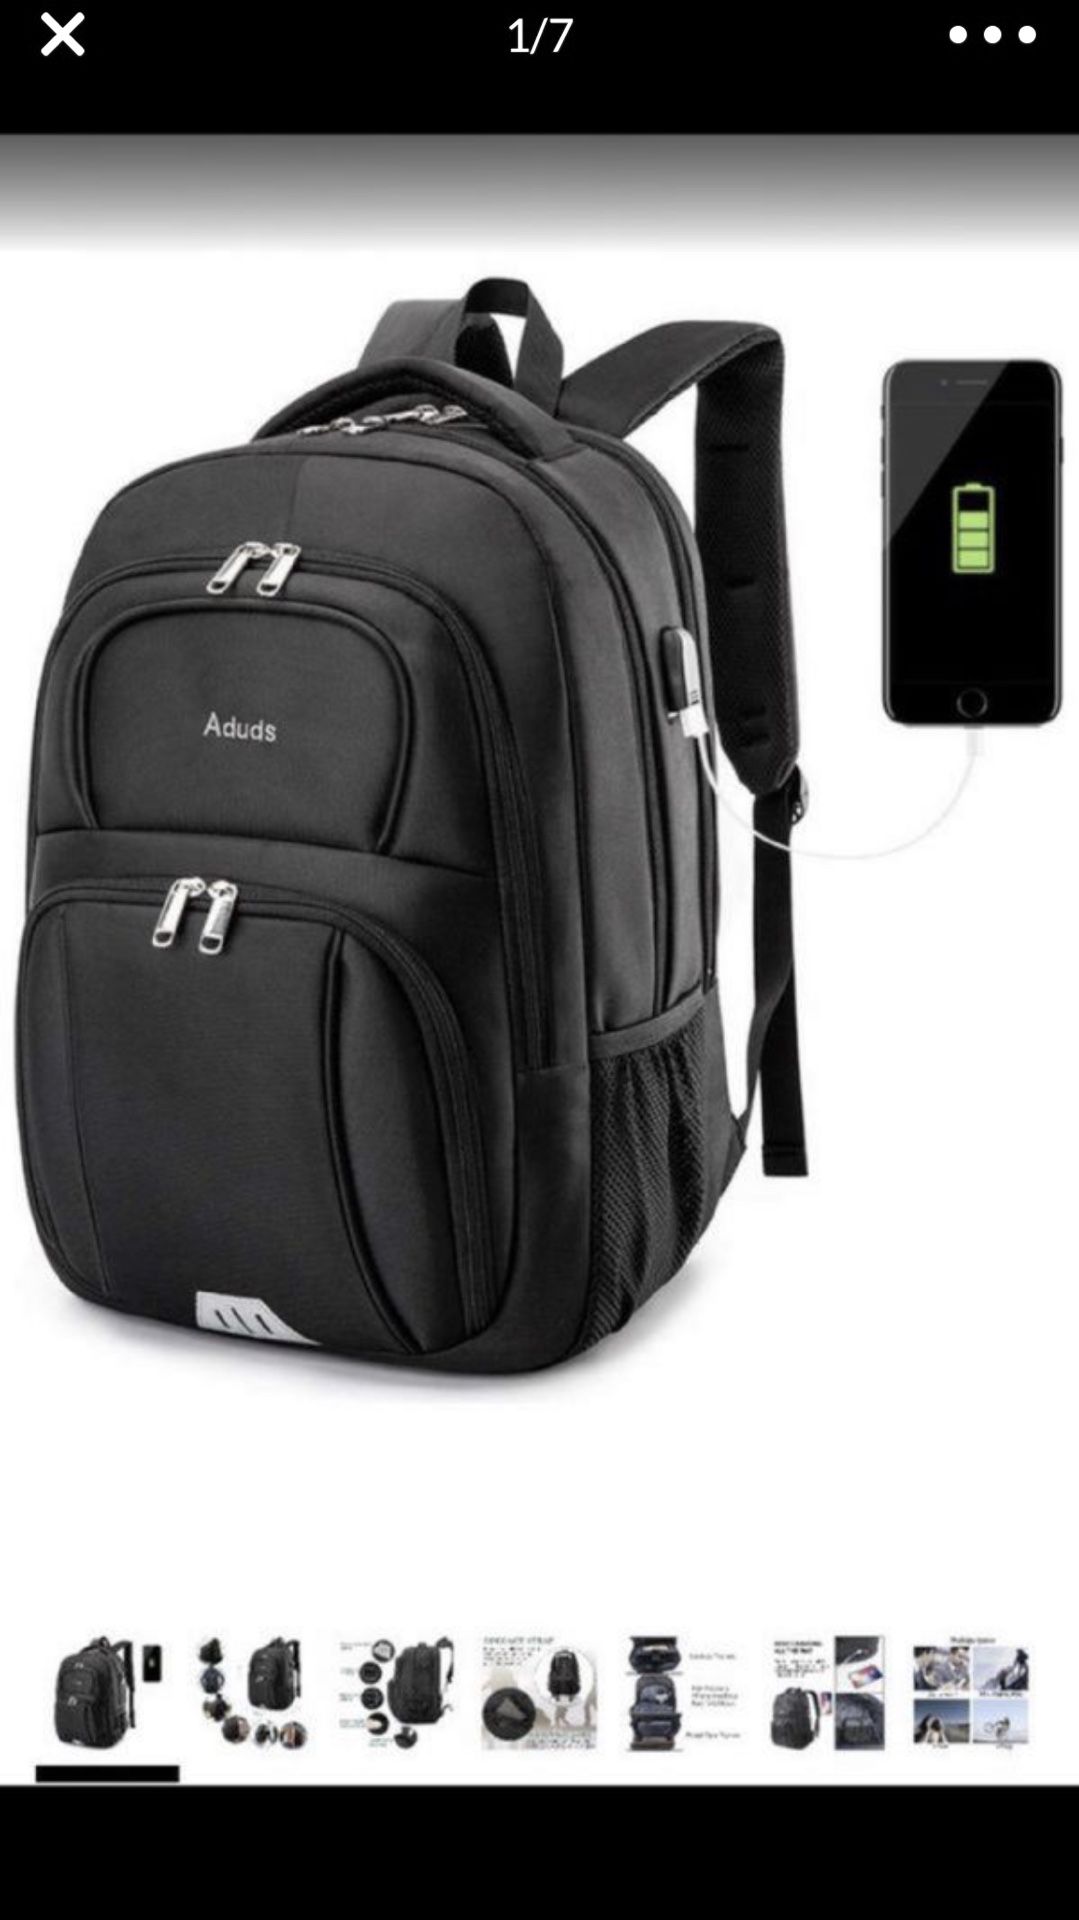 Aduds 15.6inch Laptop Backpack,Water-Resistant Durable Travel Business Computer Backpack with USB Charging Port,College Bookbag,Overnight Weekender